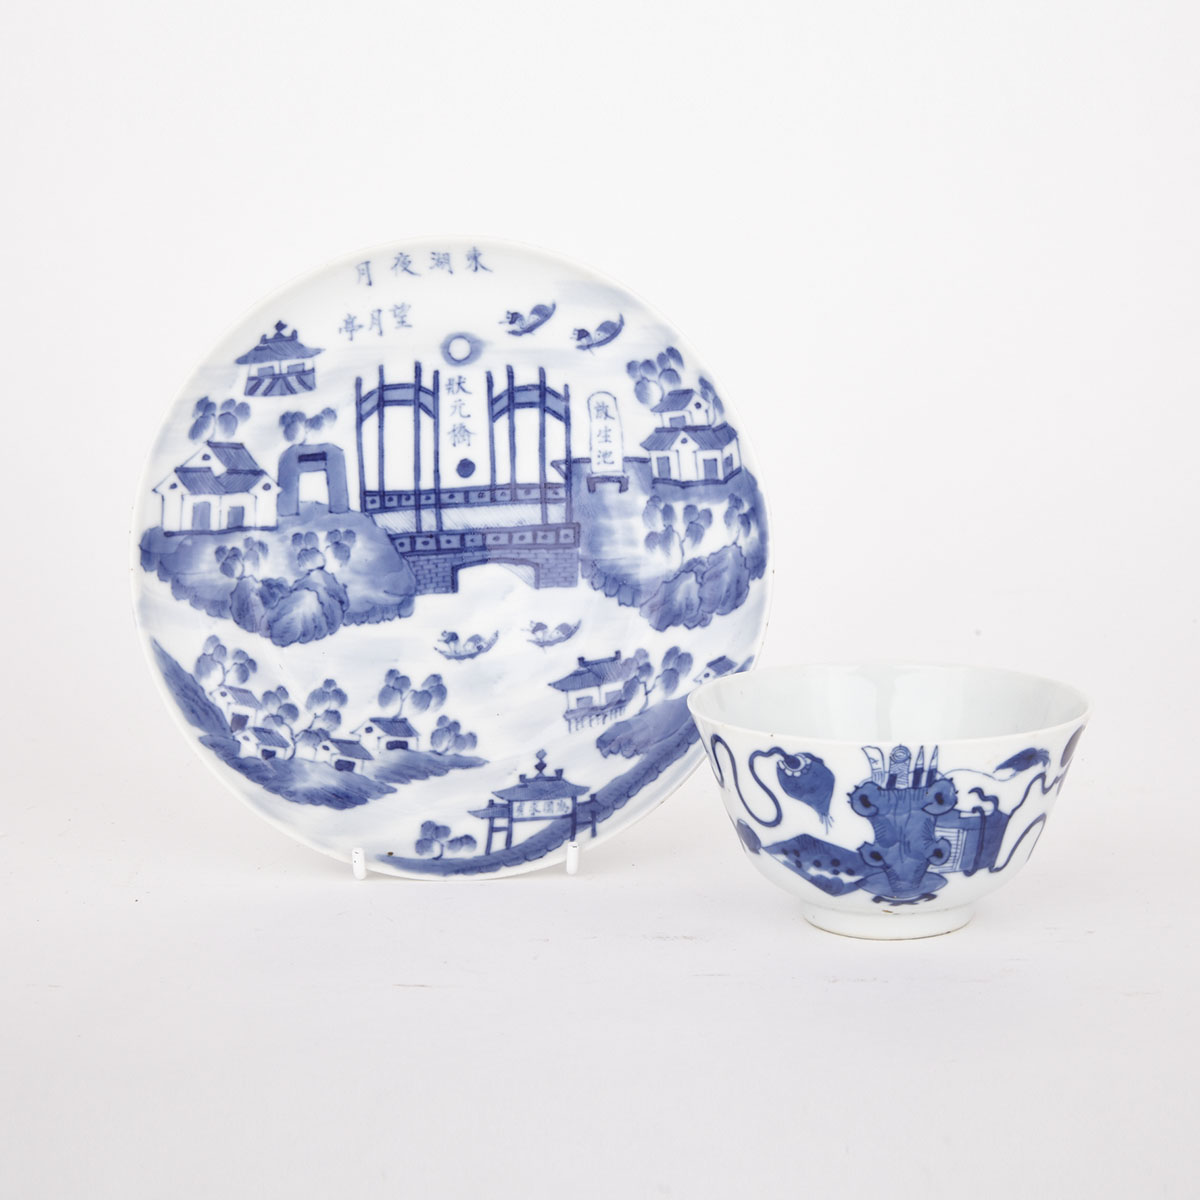 Blue and White Plate and Bowl, 19th/20th Cnetury